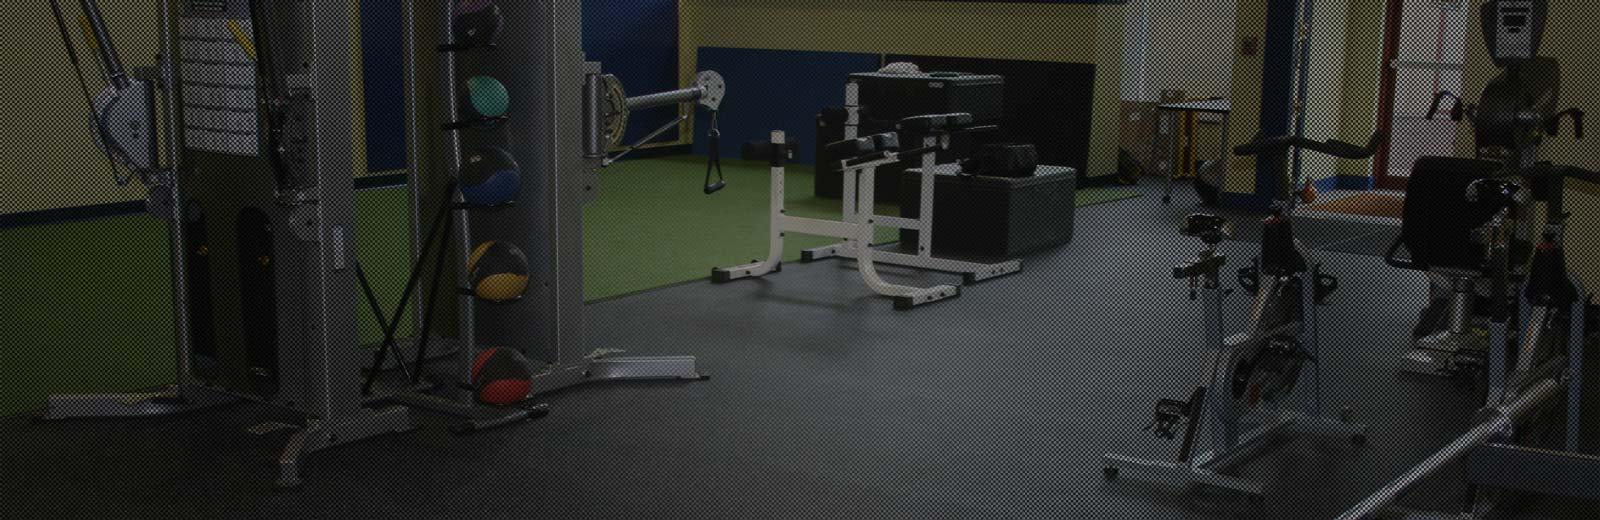 Indoor Turf & Rubber Flooring for Gyms